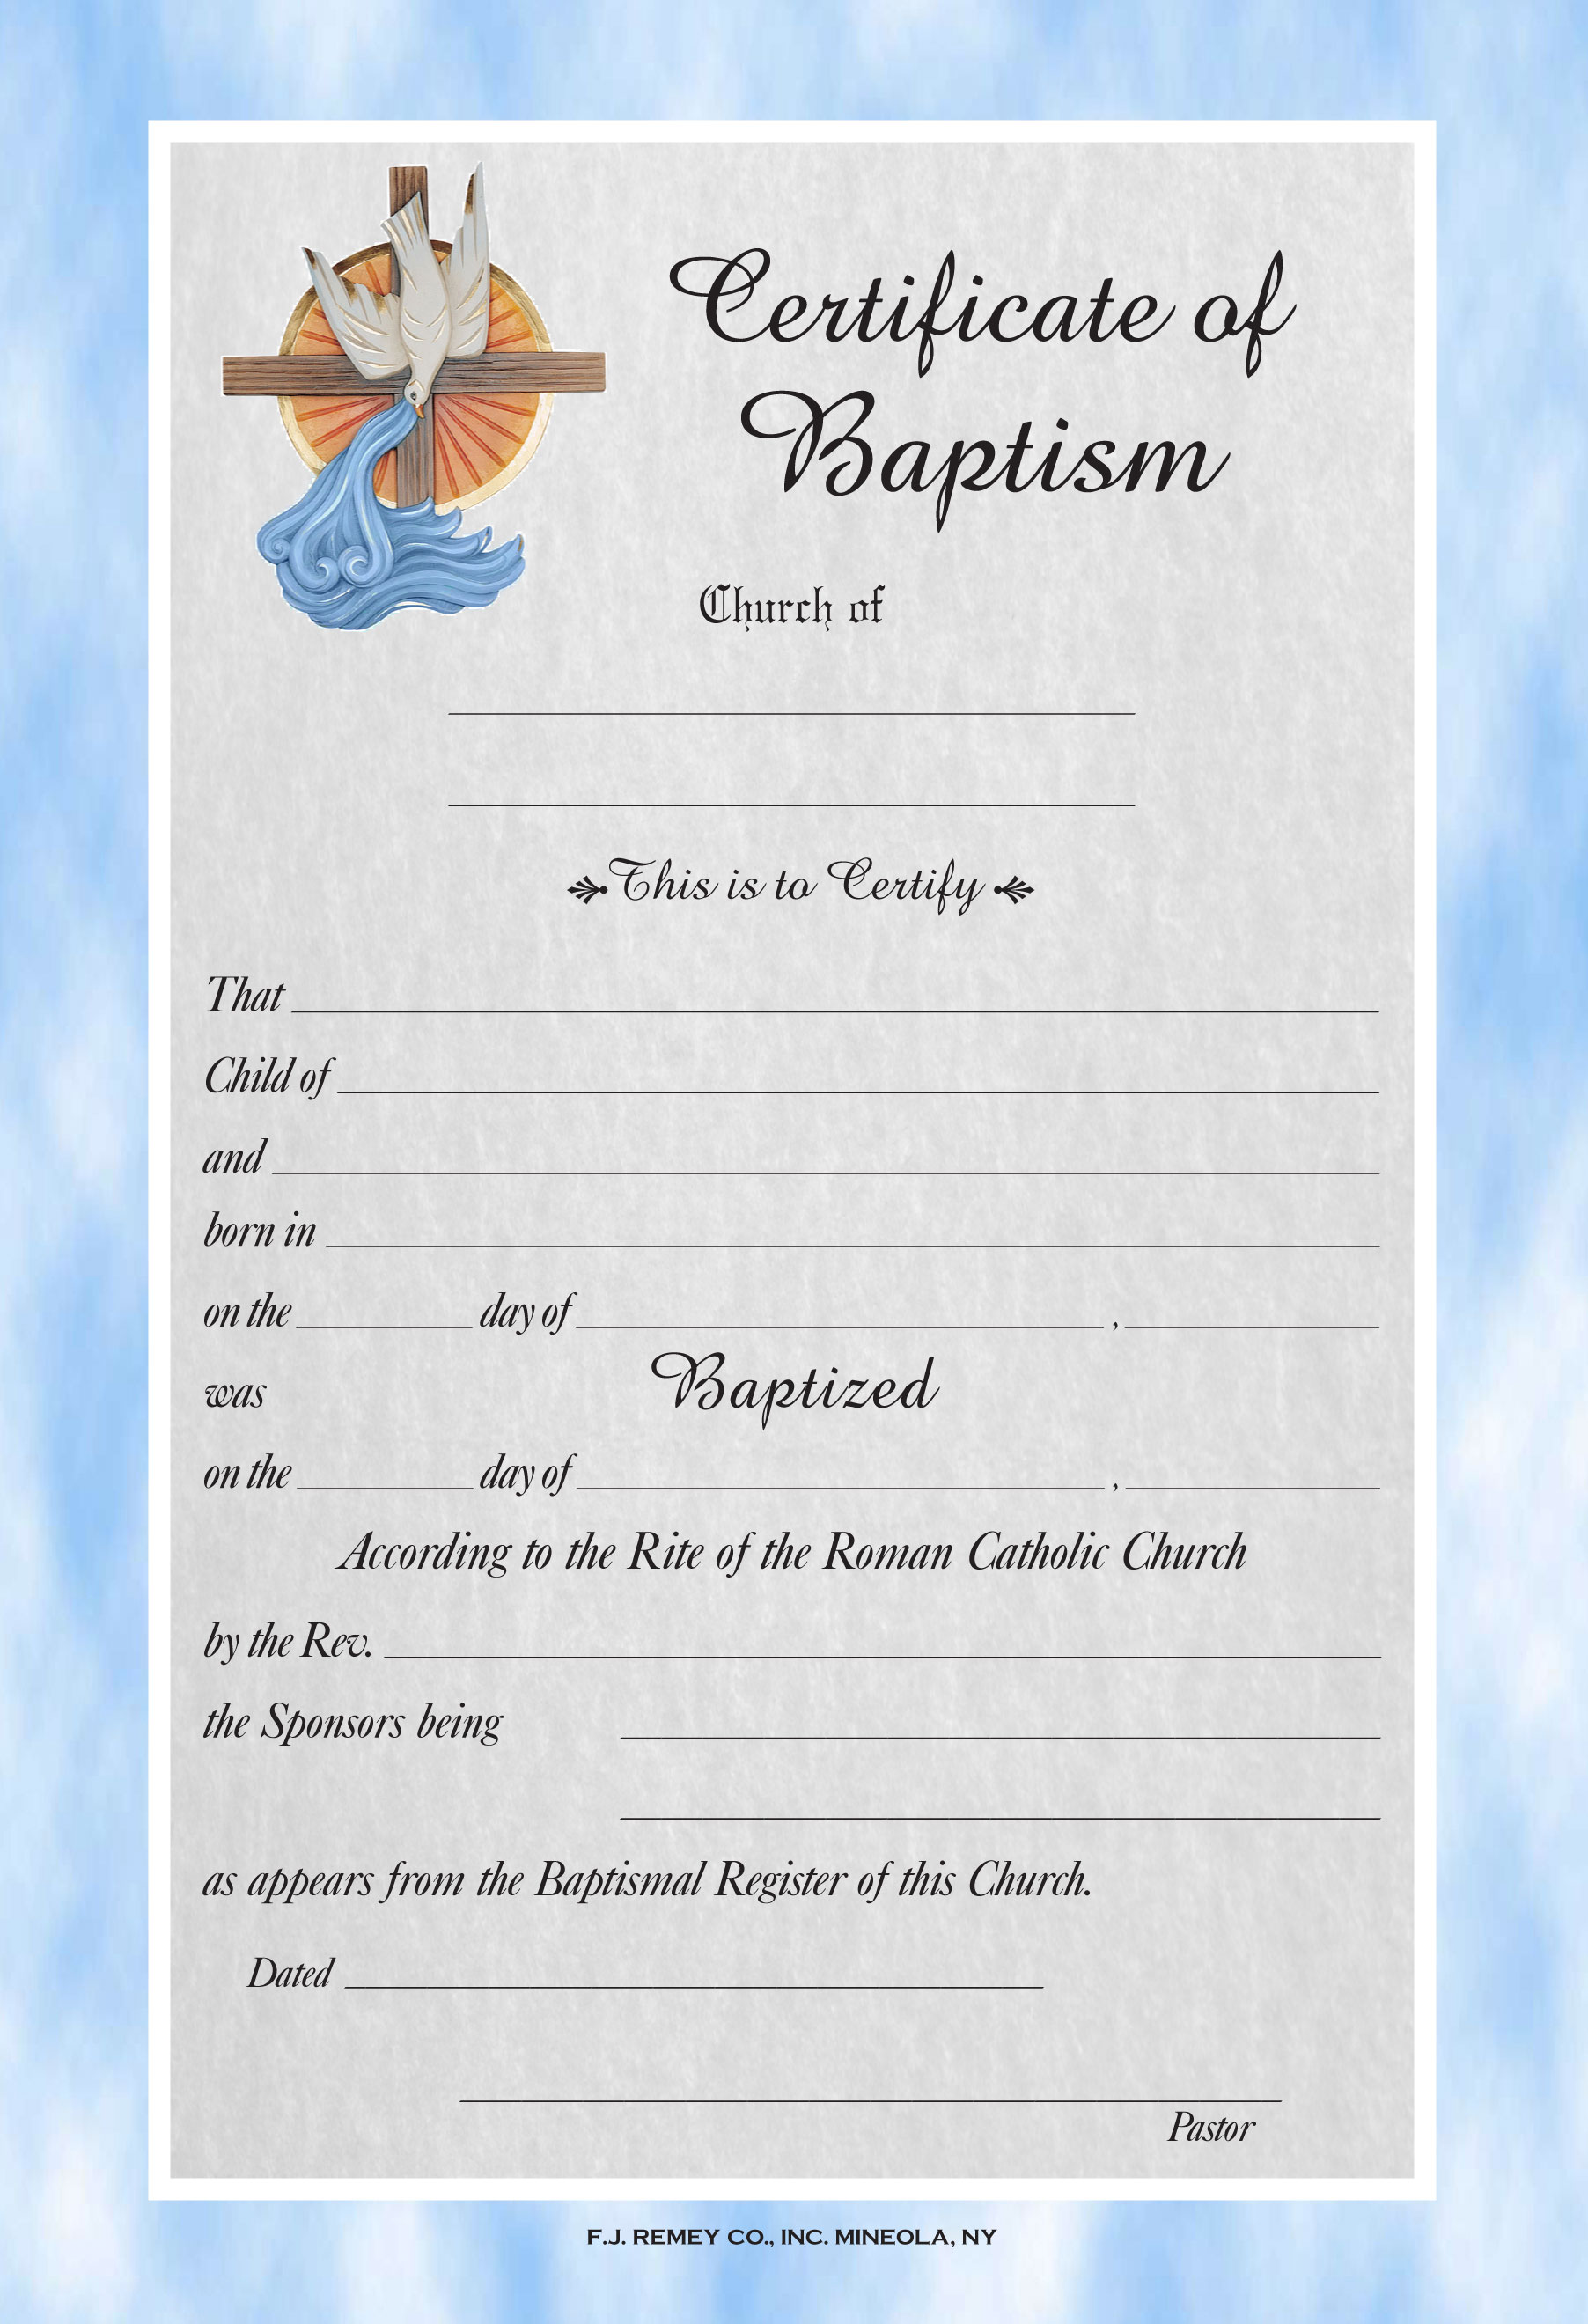 Certificate of Baptism with Blue Border